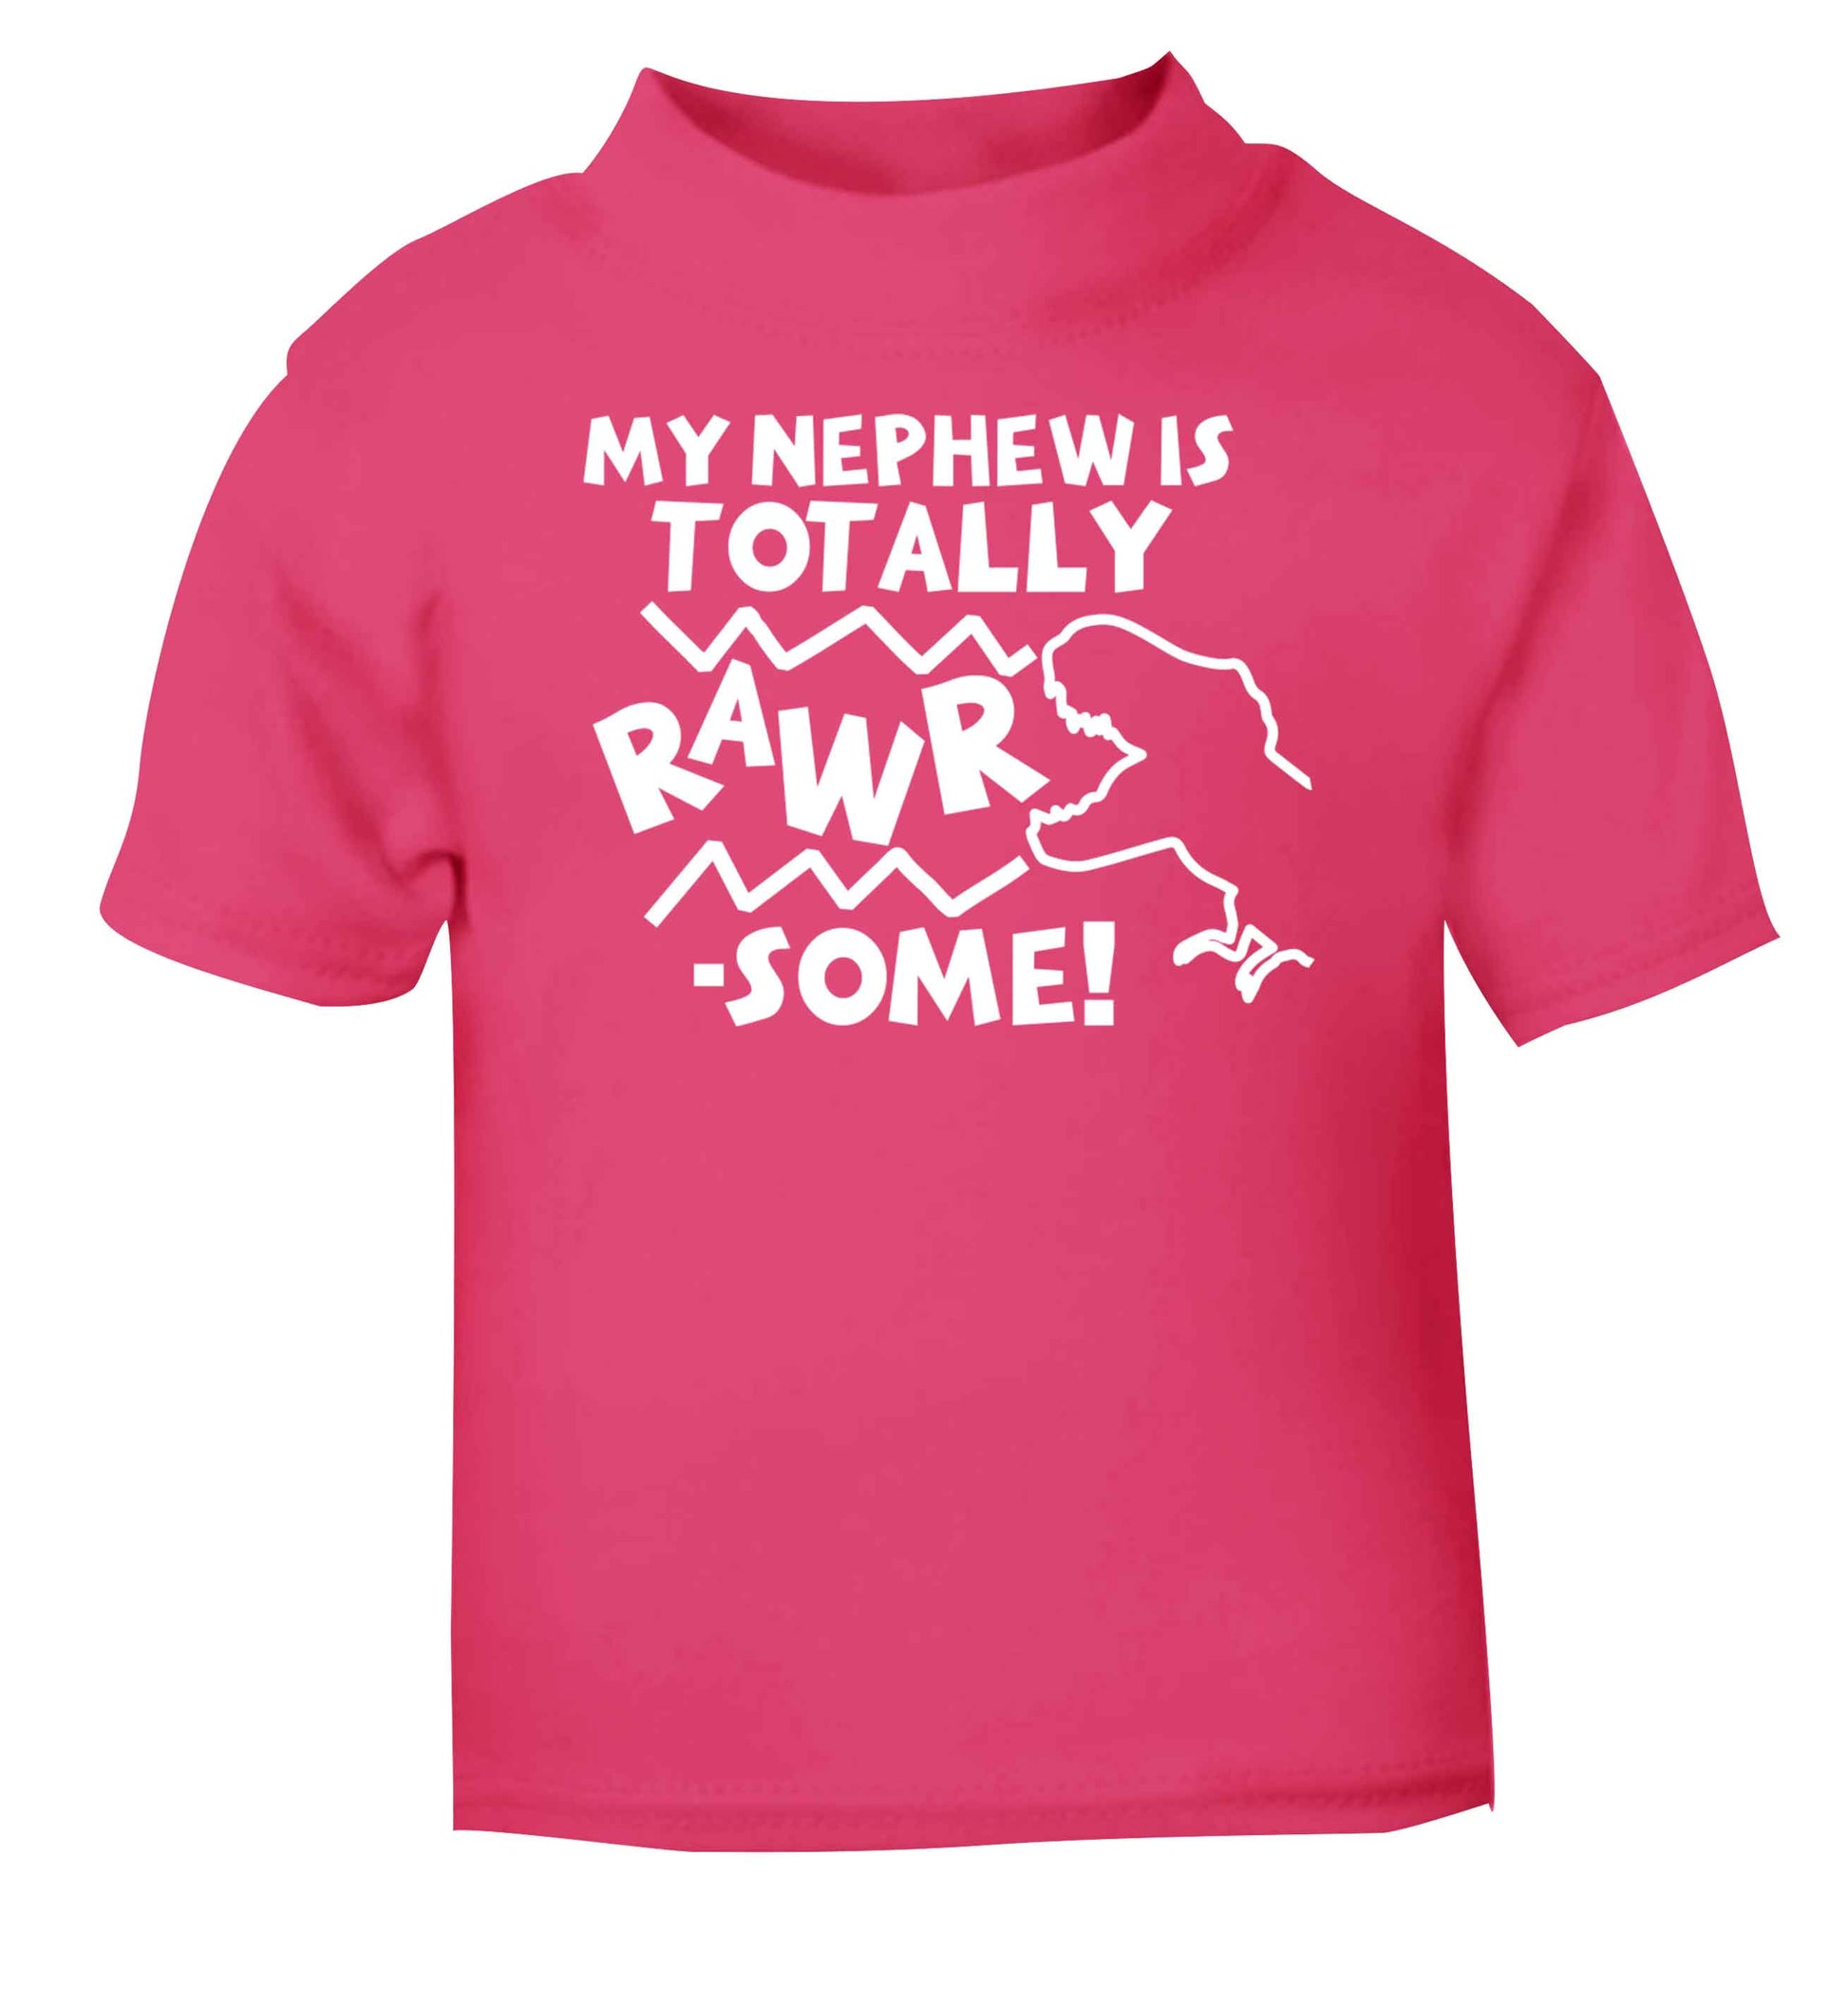 My nephew is totally rawrsome pink baby toddler Tshirt 2 Years